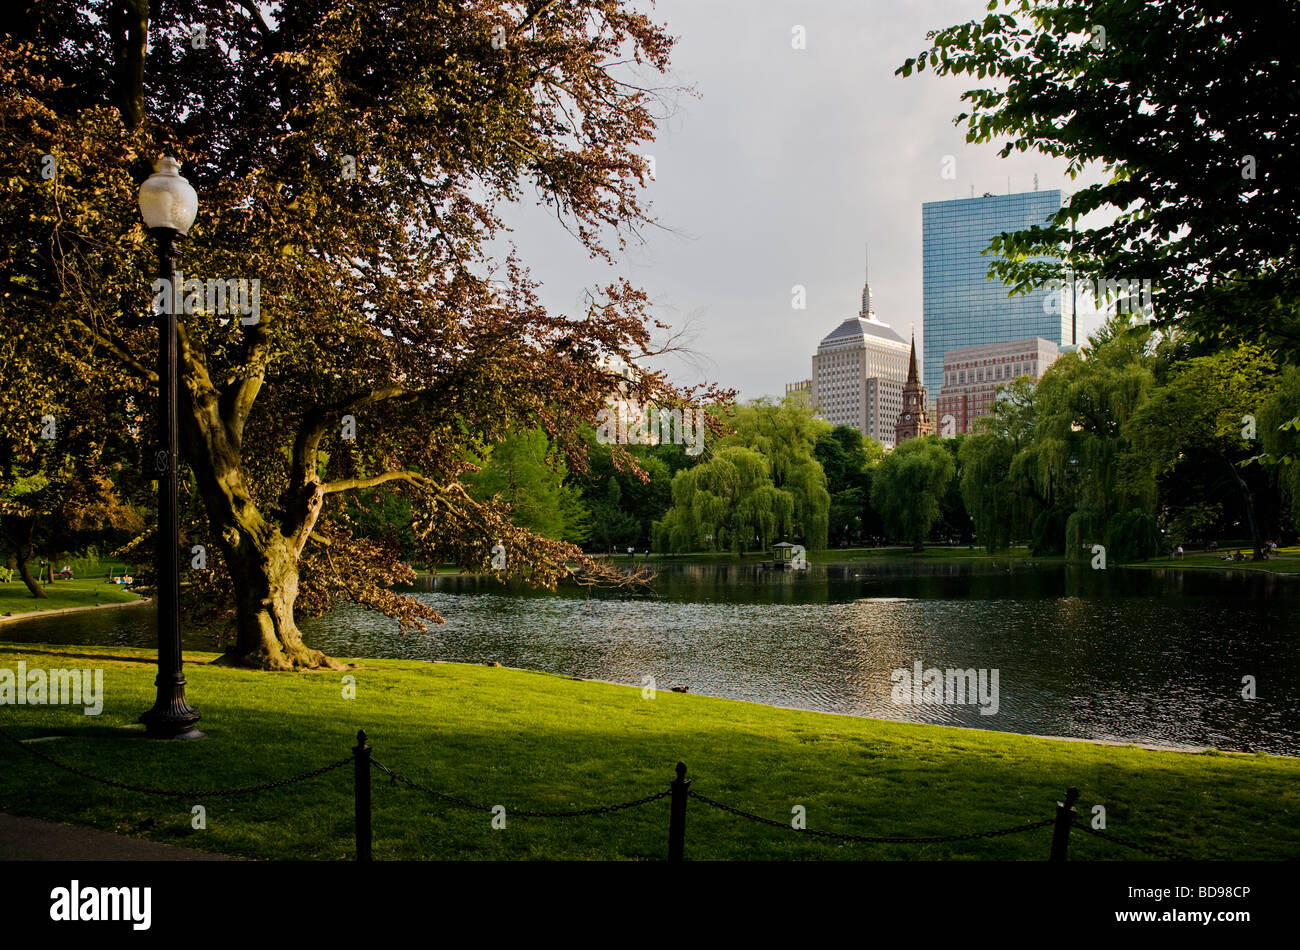 The LAGOON is a small lake in the BOSTON COMMON which is a public park and garden  BOSTON MASSACHUSETTS Stock Photo